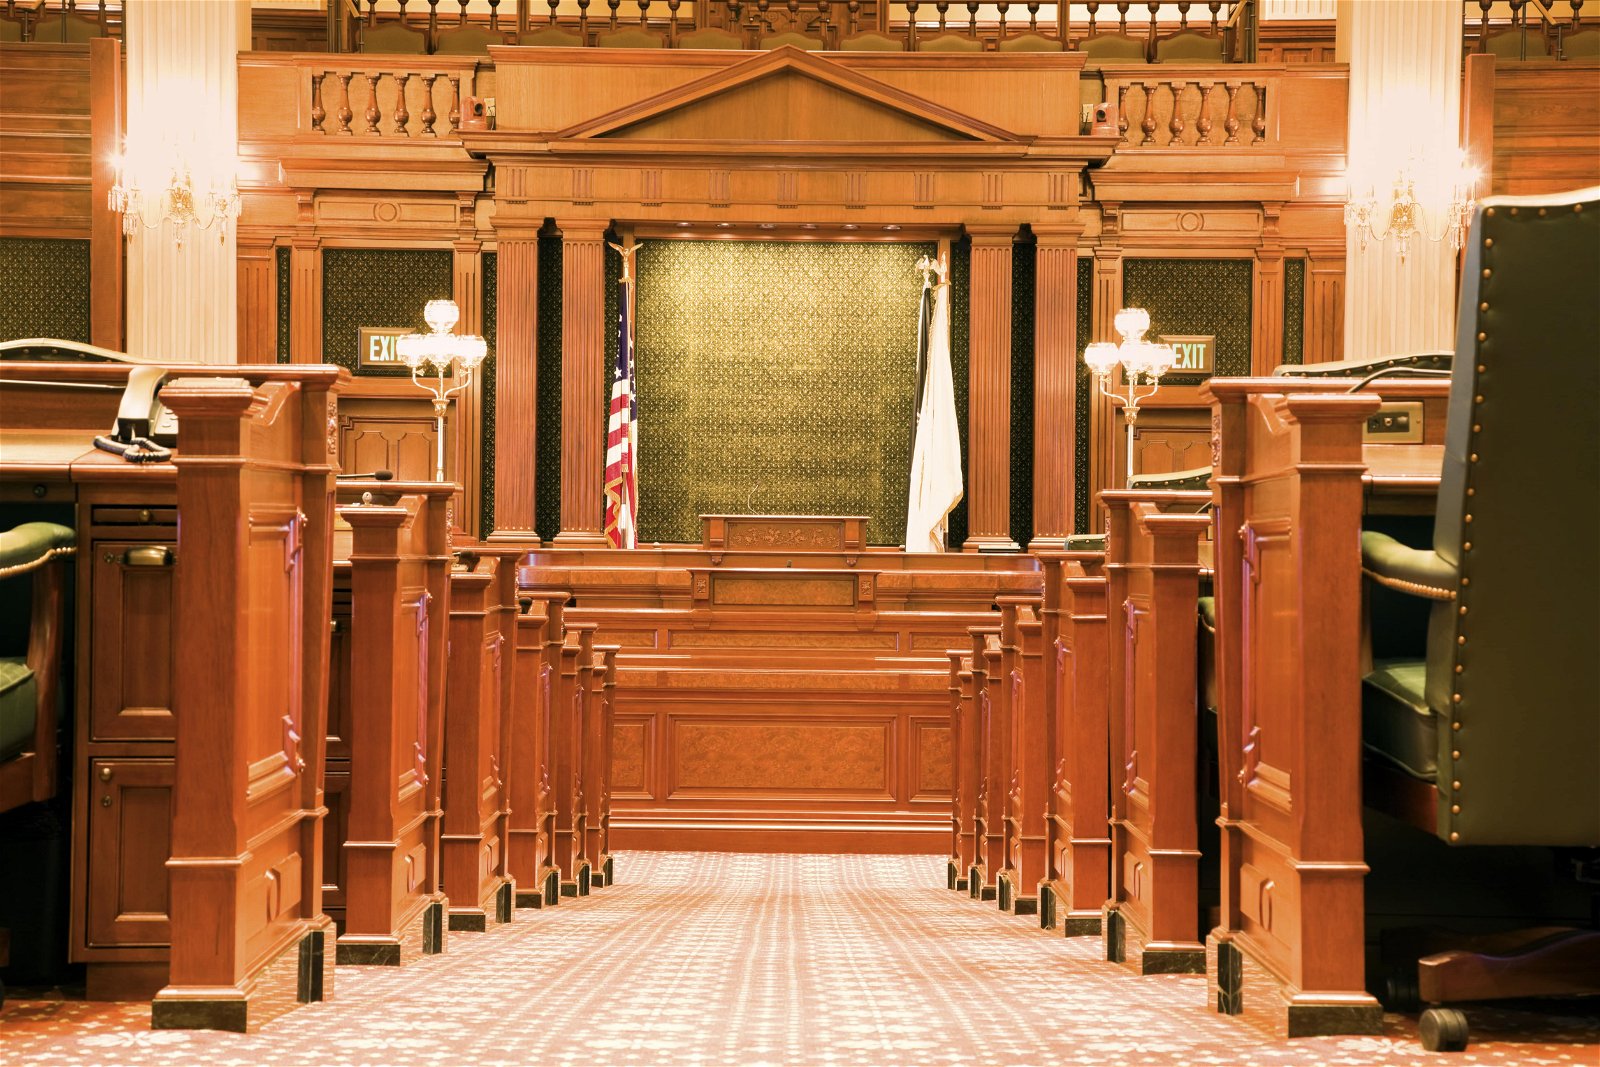 Courthouse before a trial.